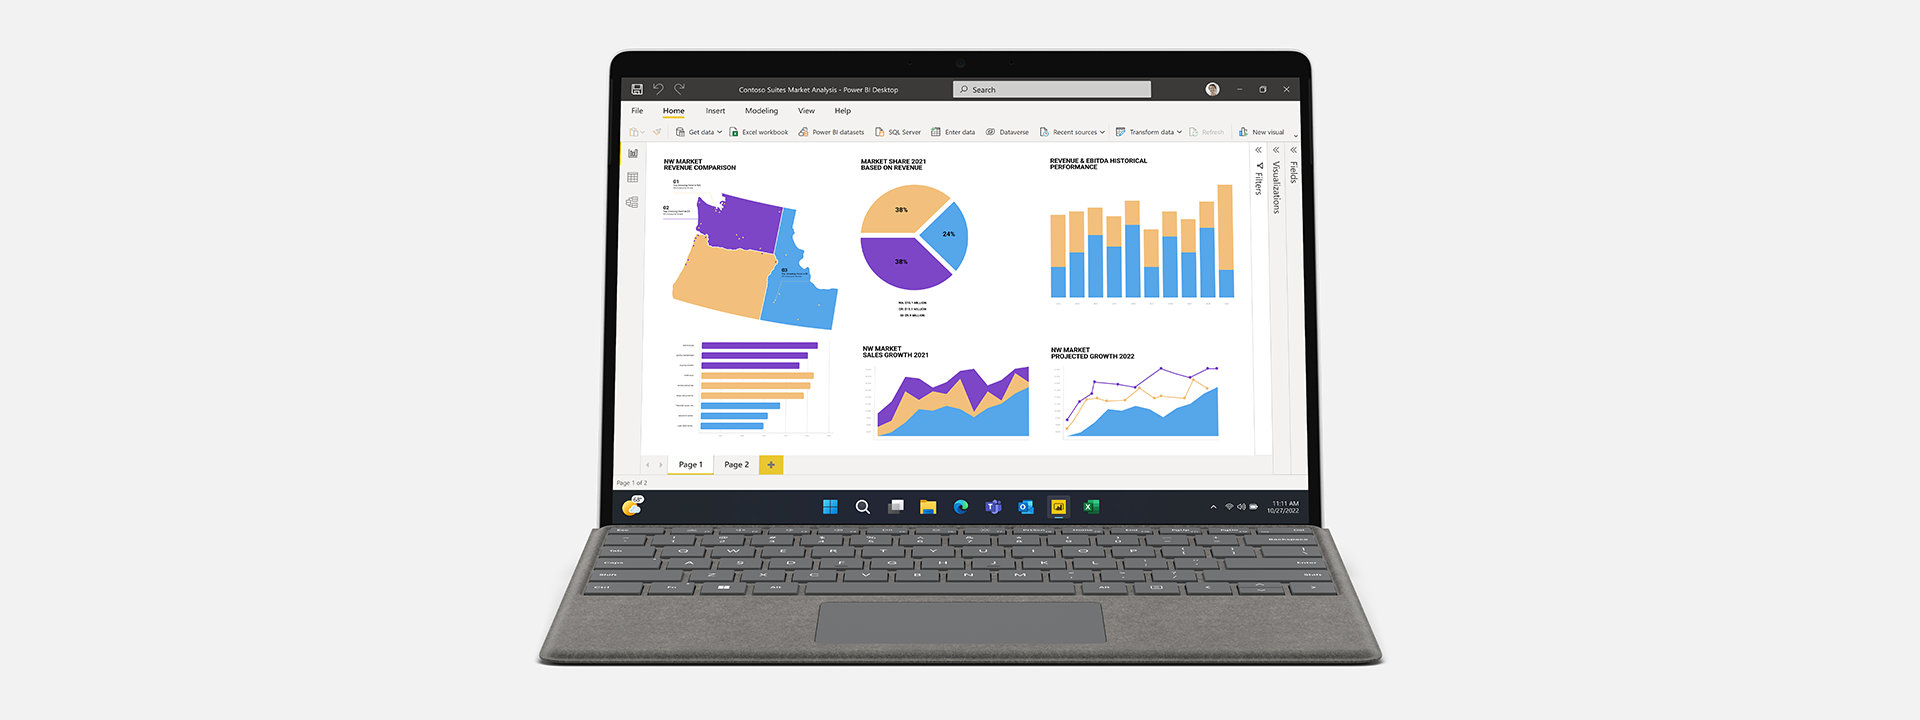 Surface Pro 9 for Business with Microsoft Power BI on the screen. 